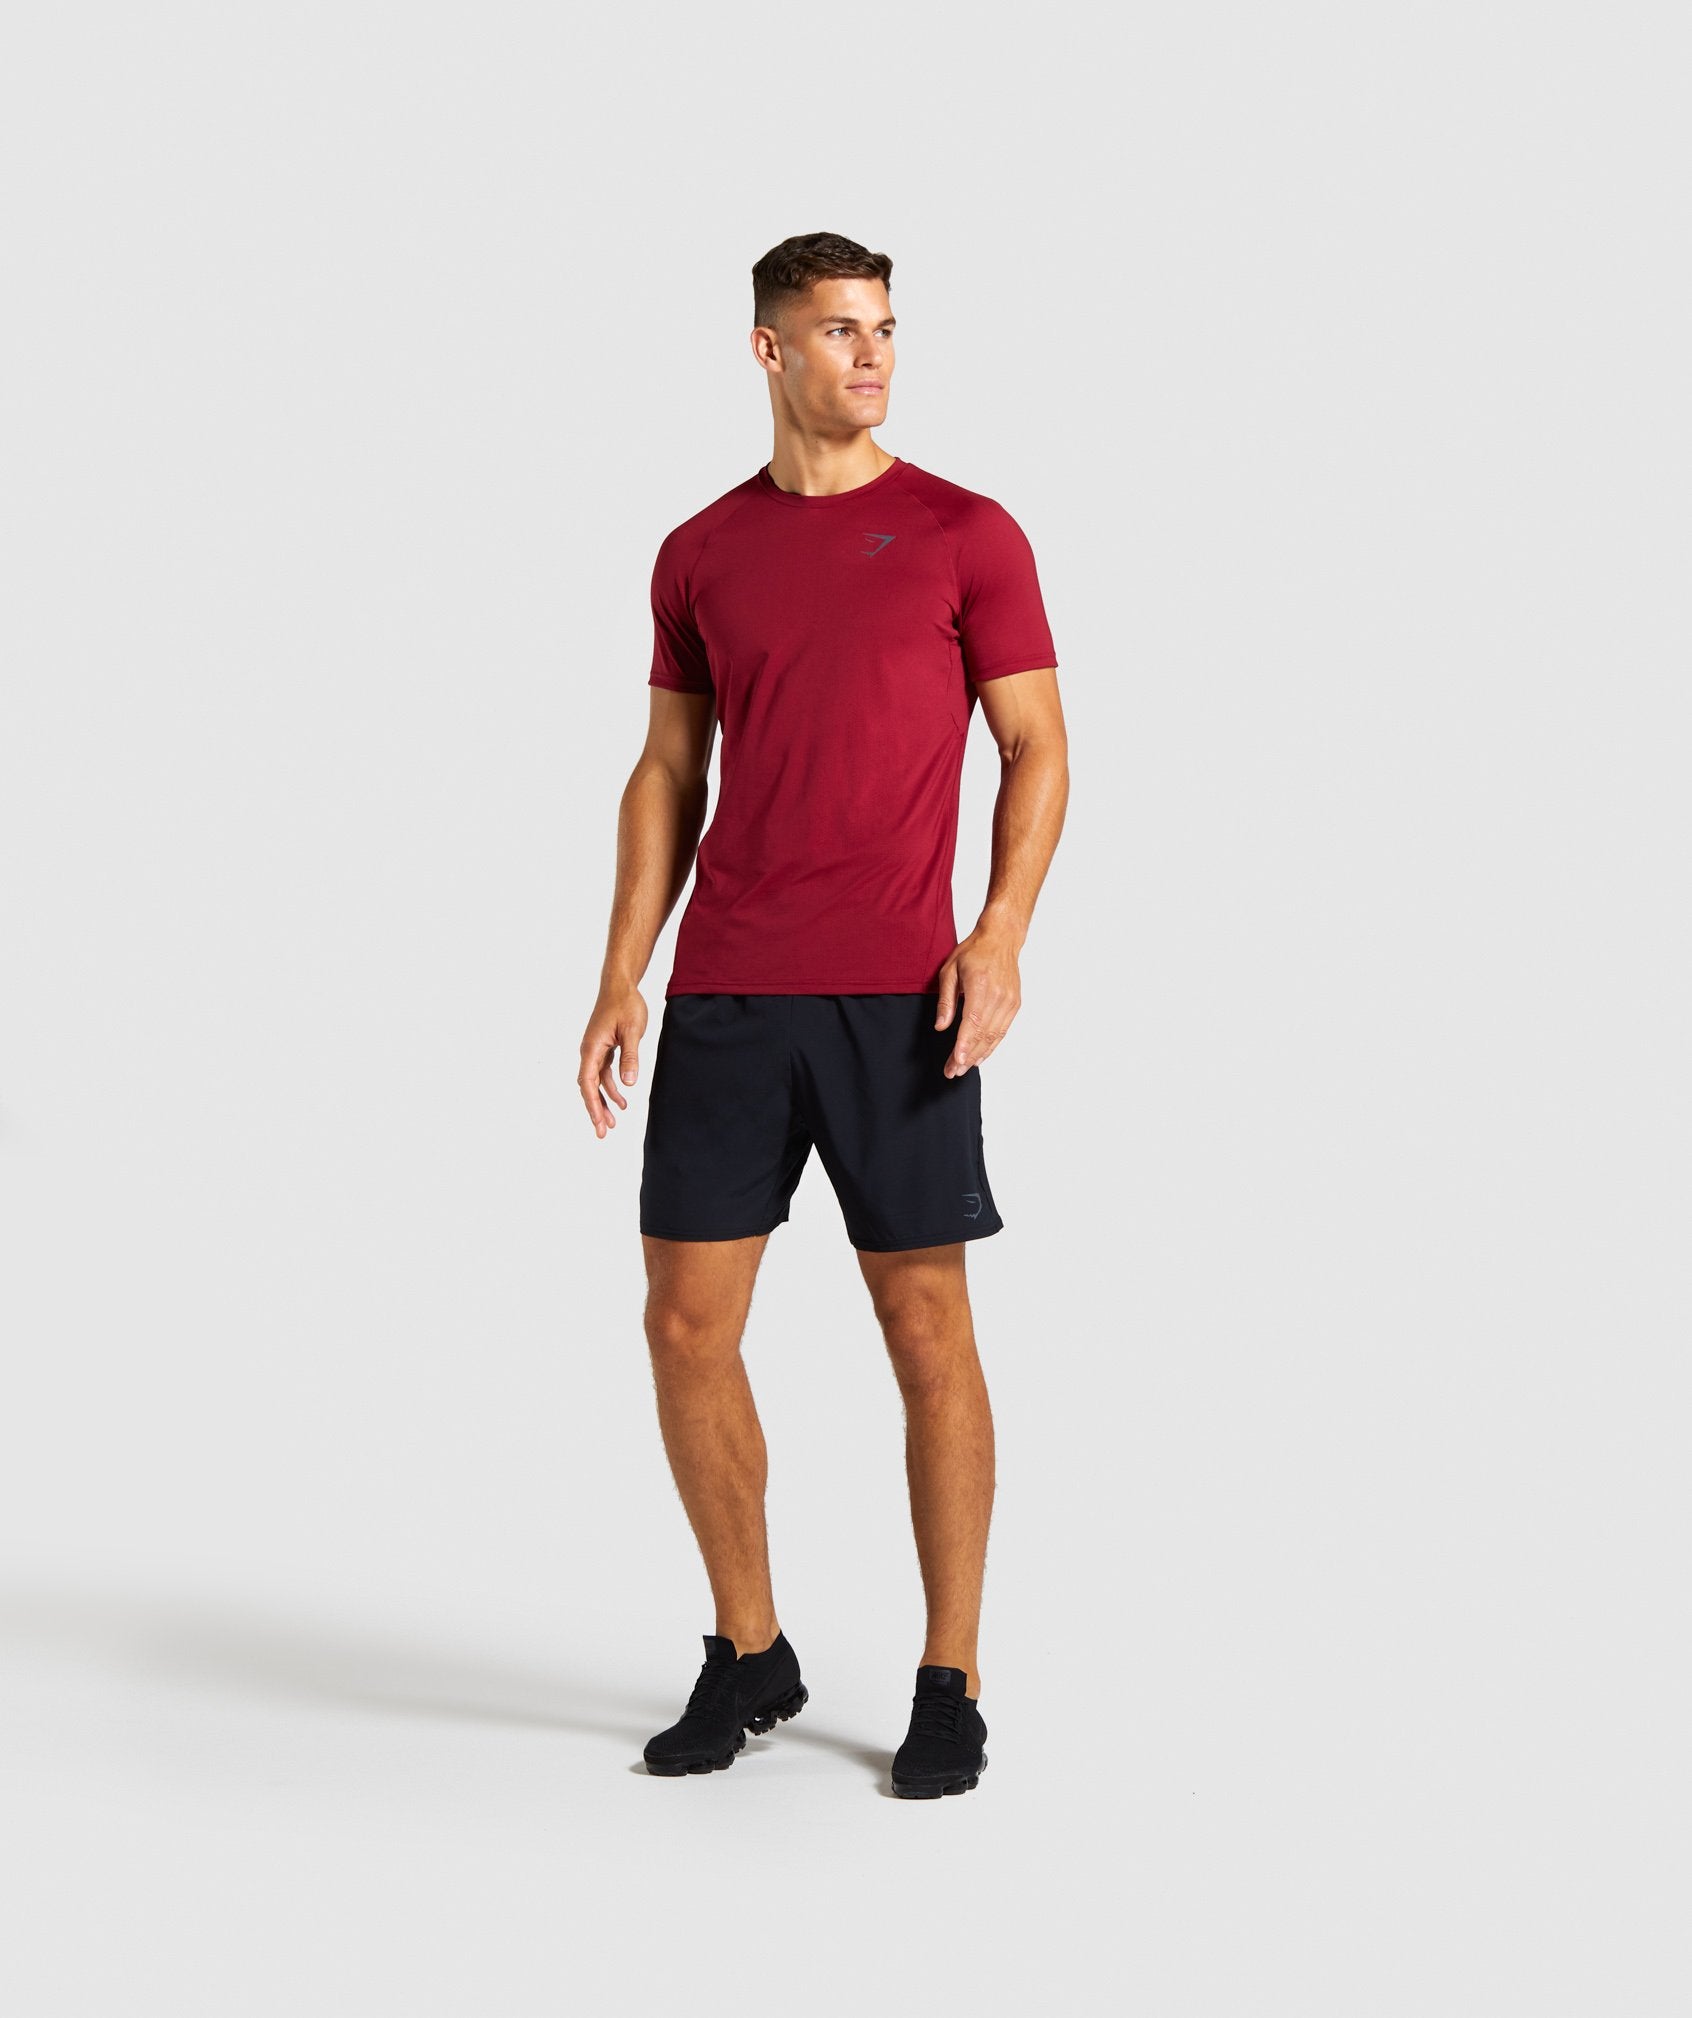 Contemporary T-Shirt in Claret - view 4